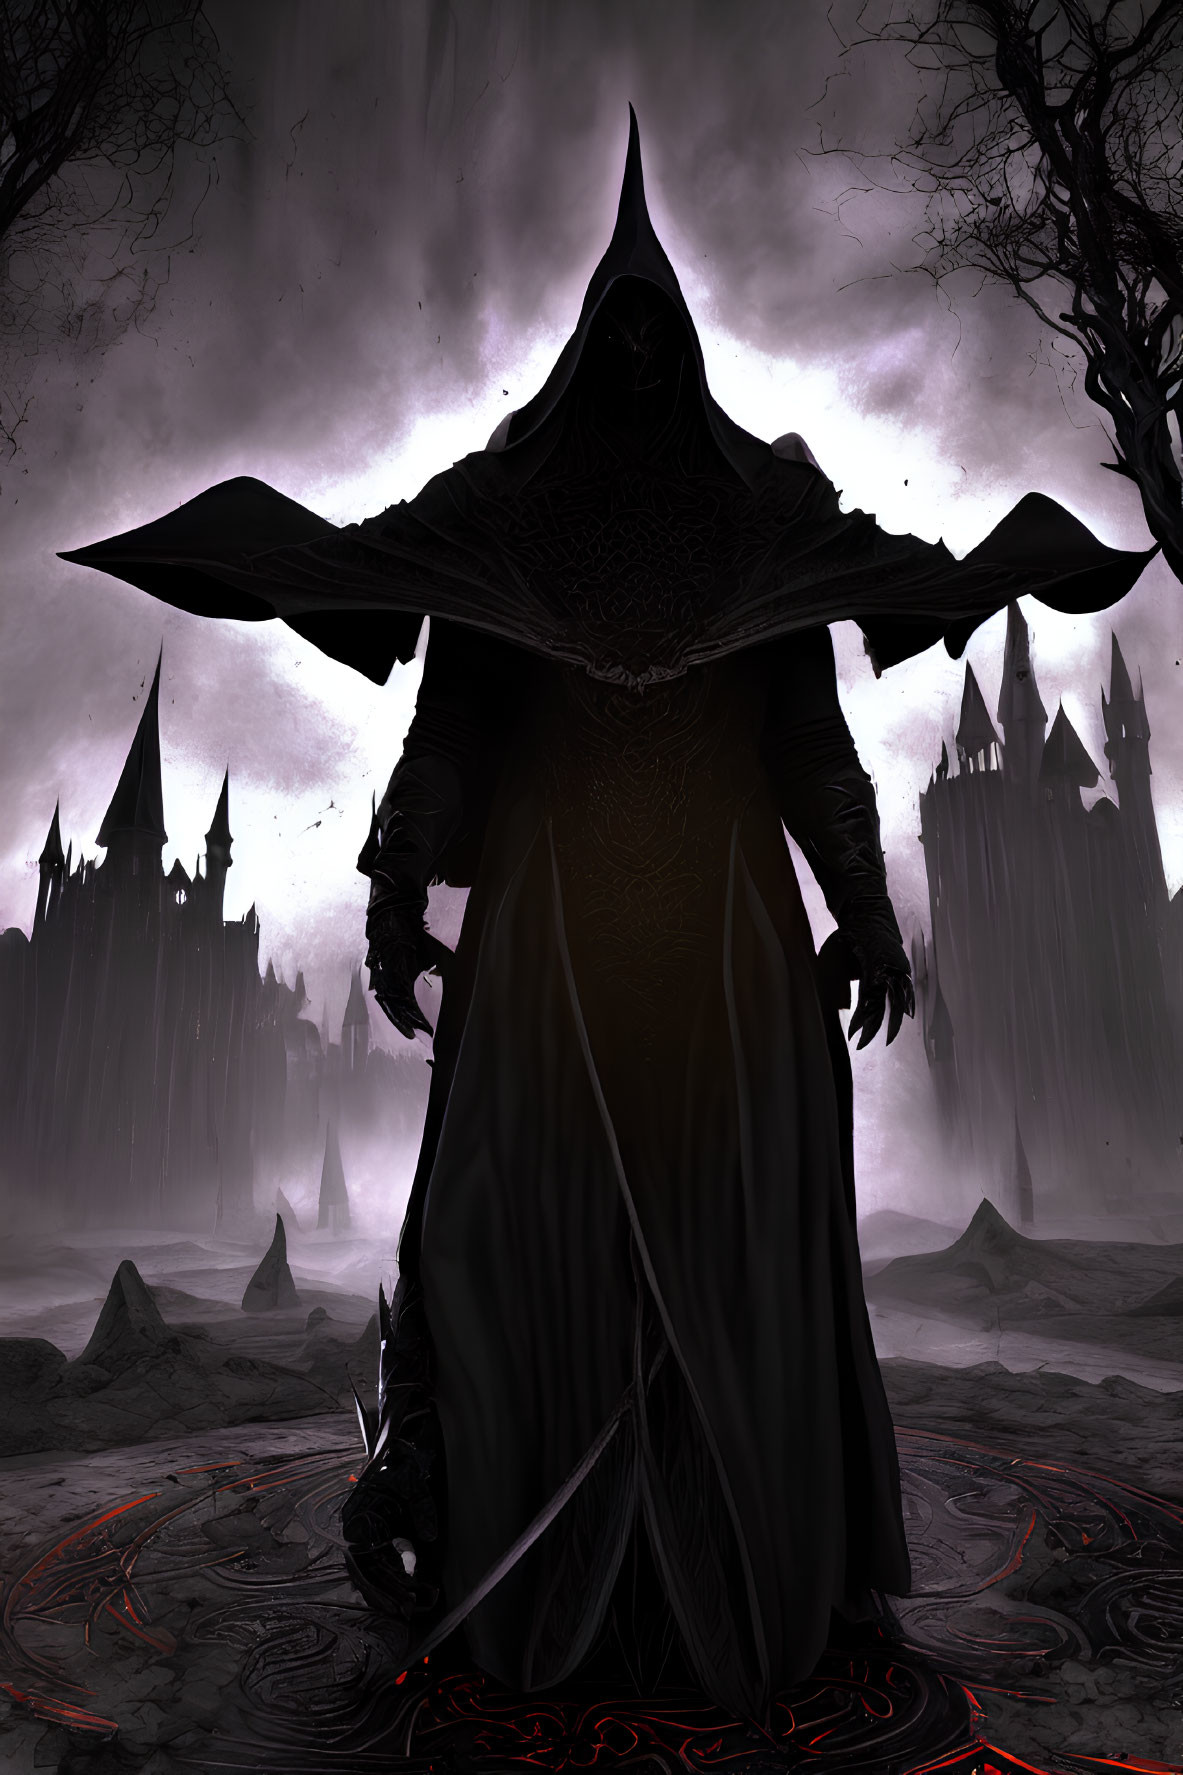 Mysterious figure in dark cloak on ritual circle with ominous spires